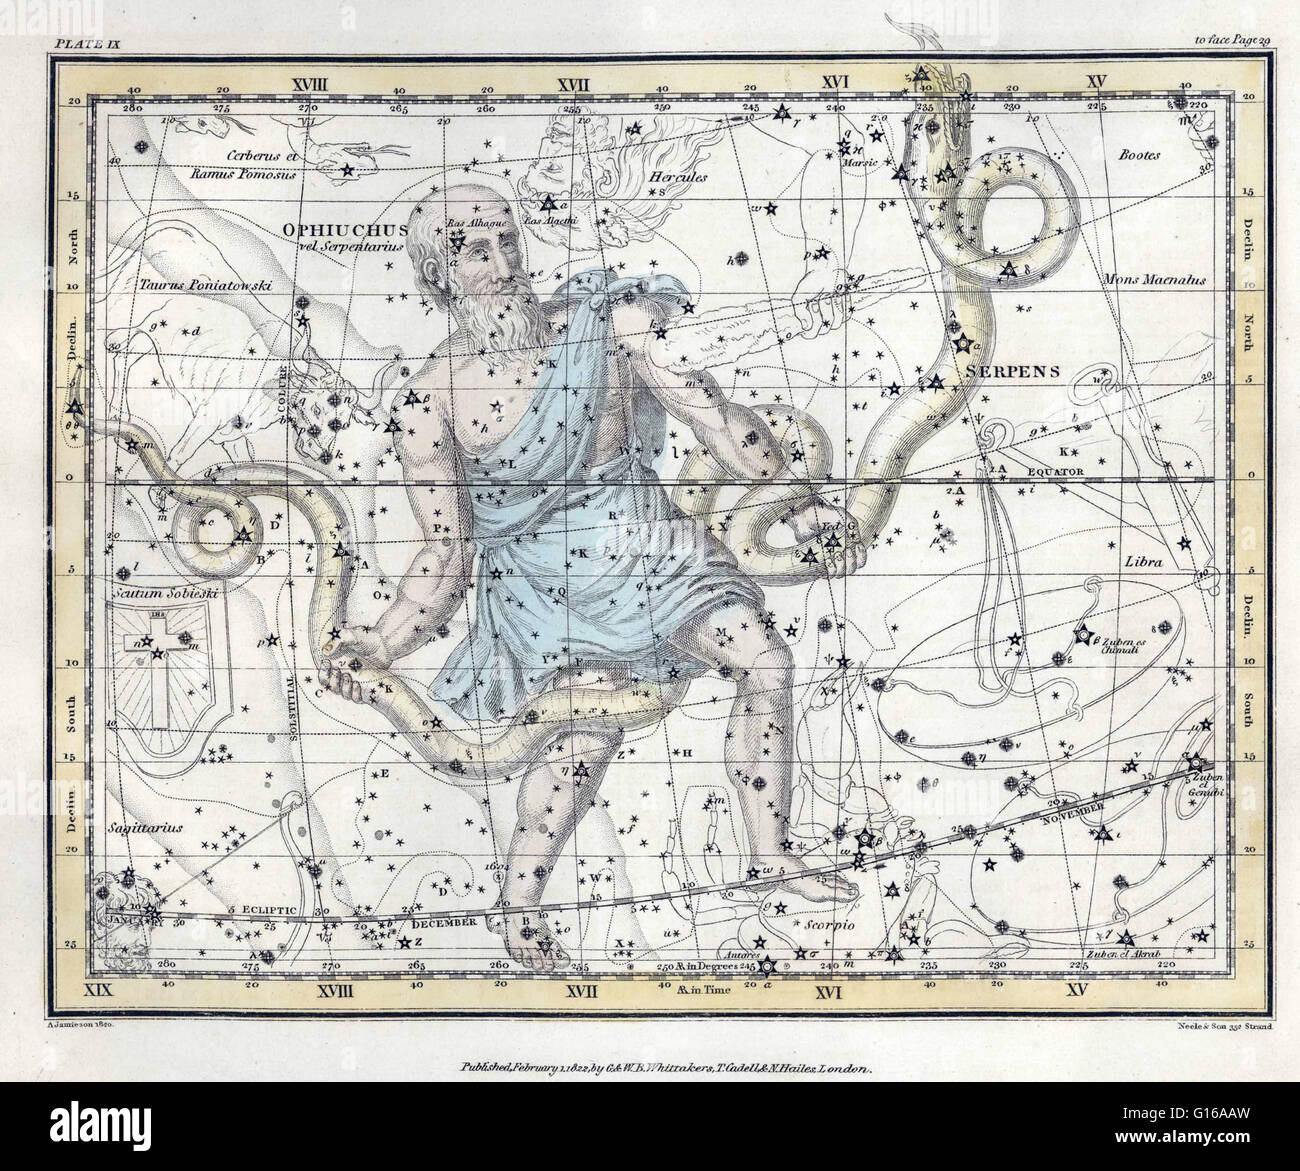 Ophiuchus is a large constellation located around the celestial equator. It is commonly represented as a man grasping the snake that is represented by the constellation Serpens. Serpens is unique among the modern constellations in being split into two non Stock Photo